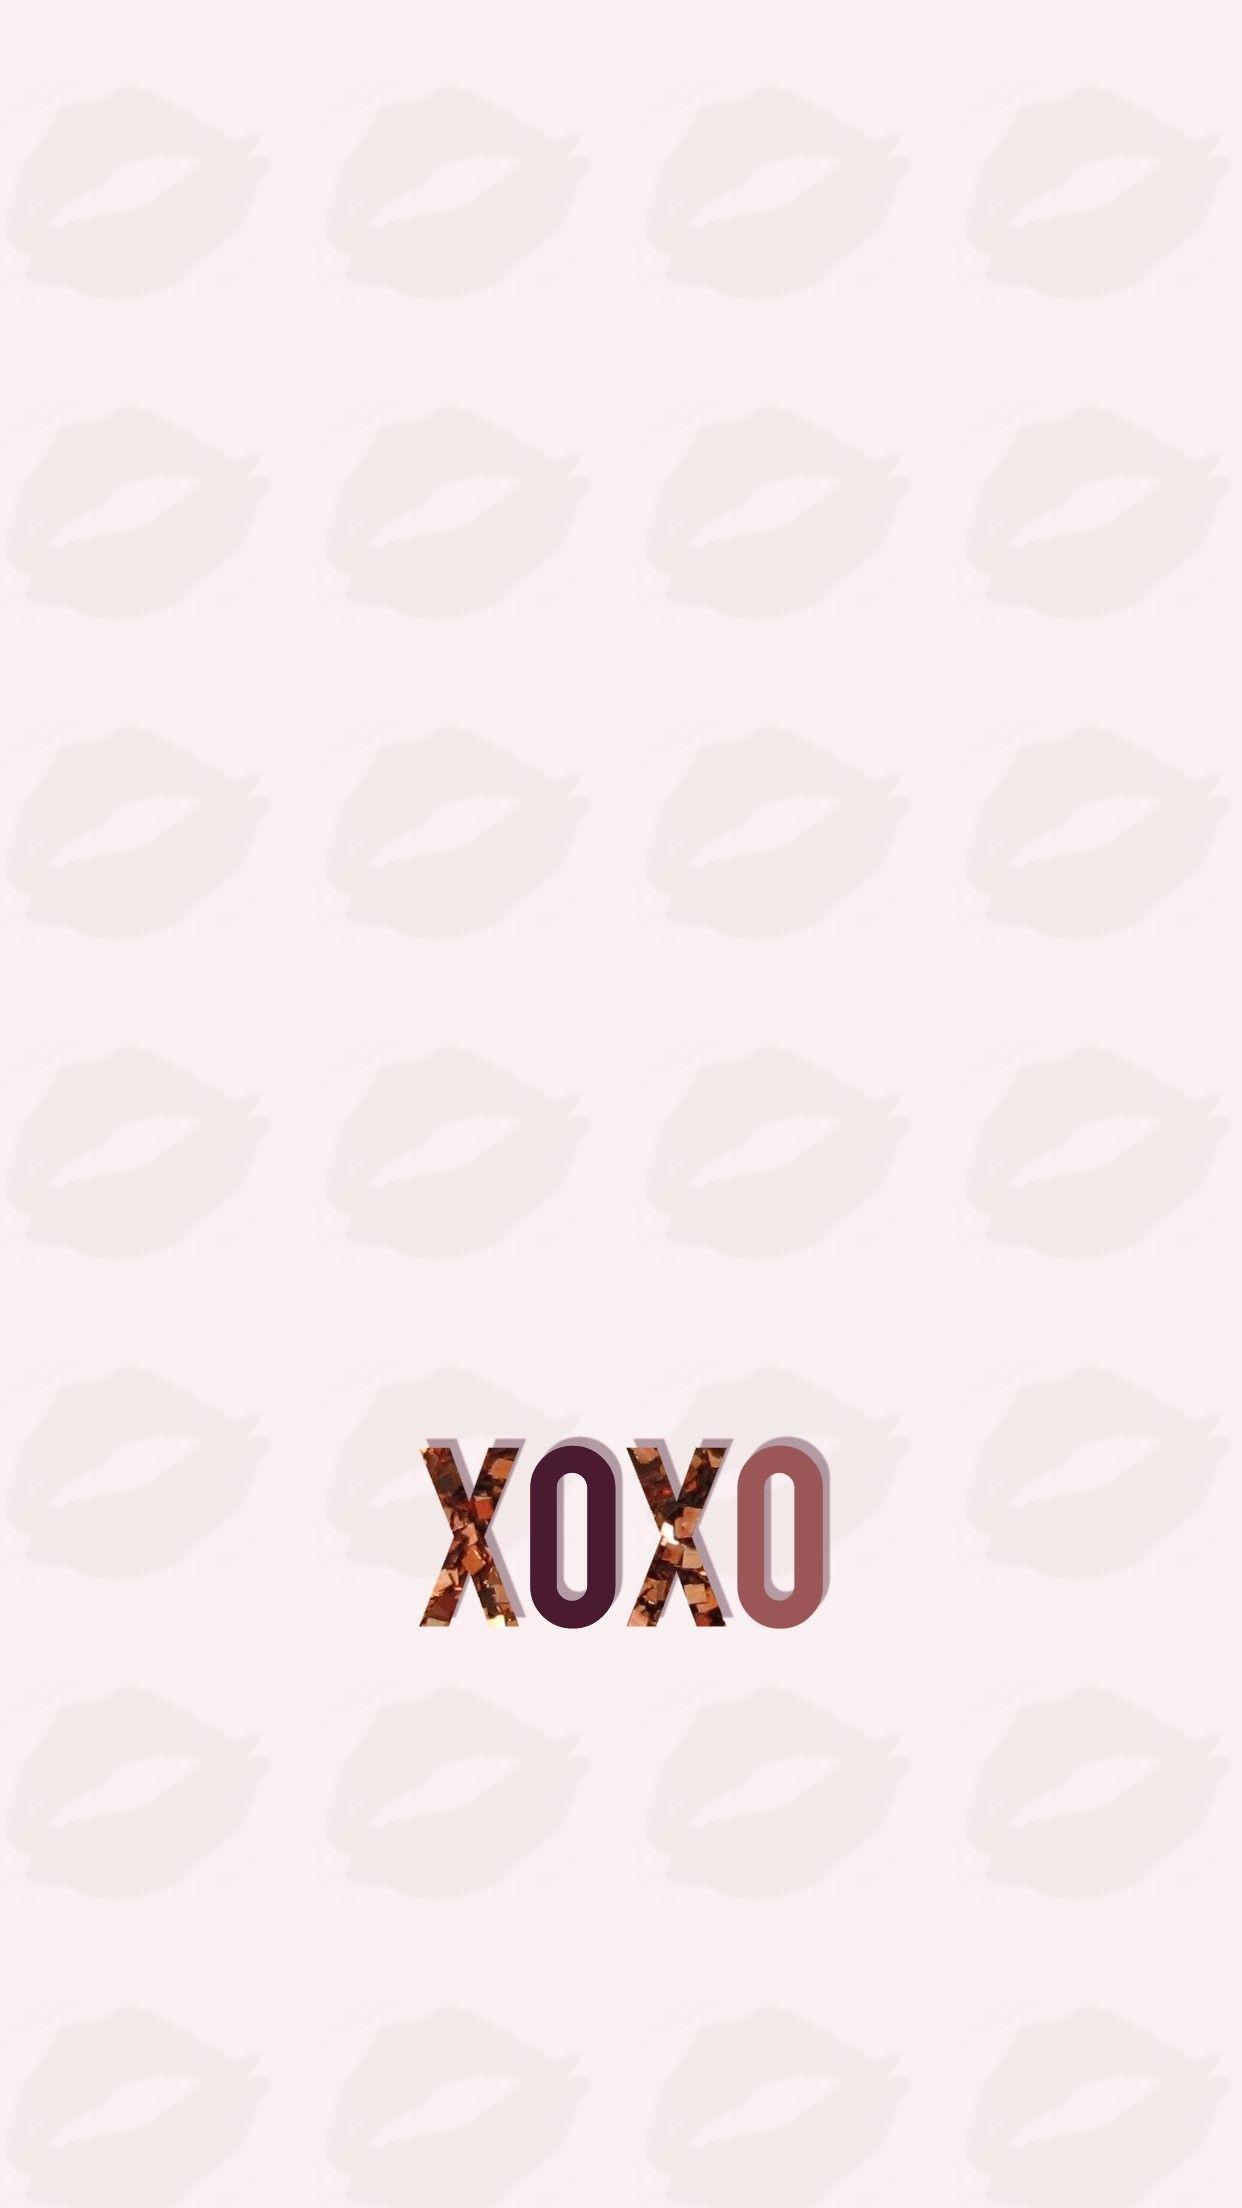 Wallpaper, background, iPhone, Android, HD, Xoxo, lips, kiss